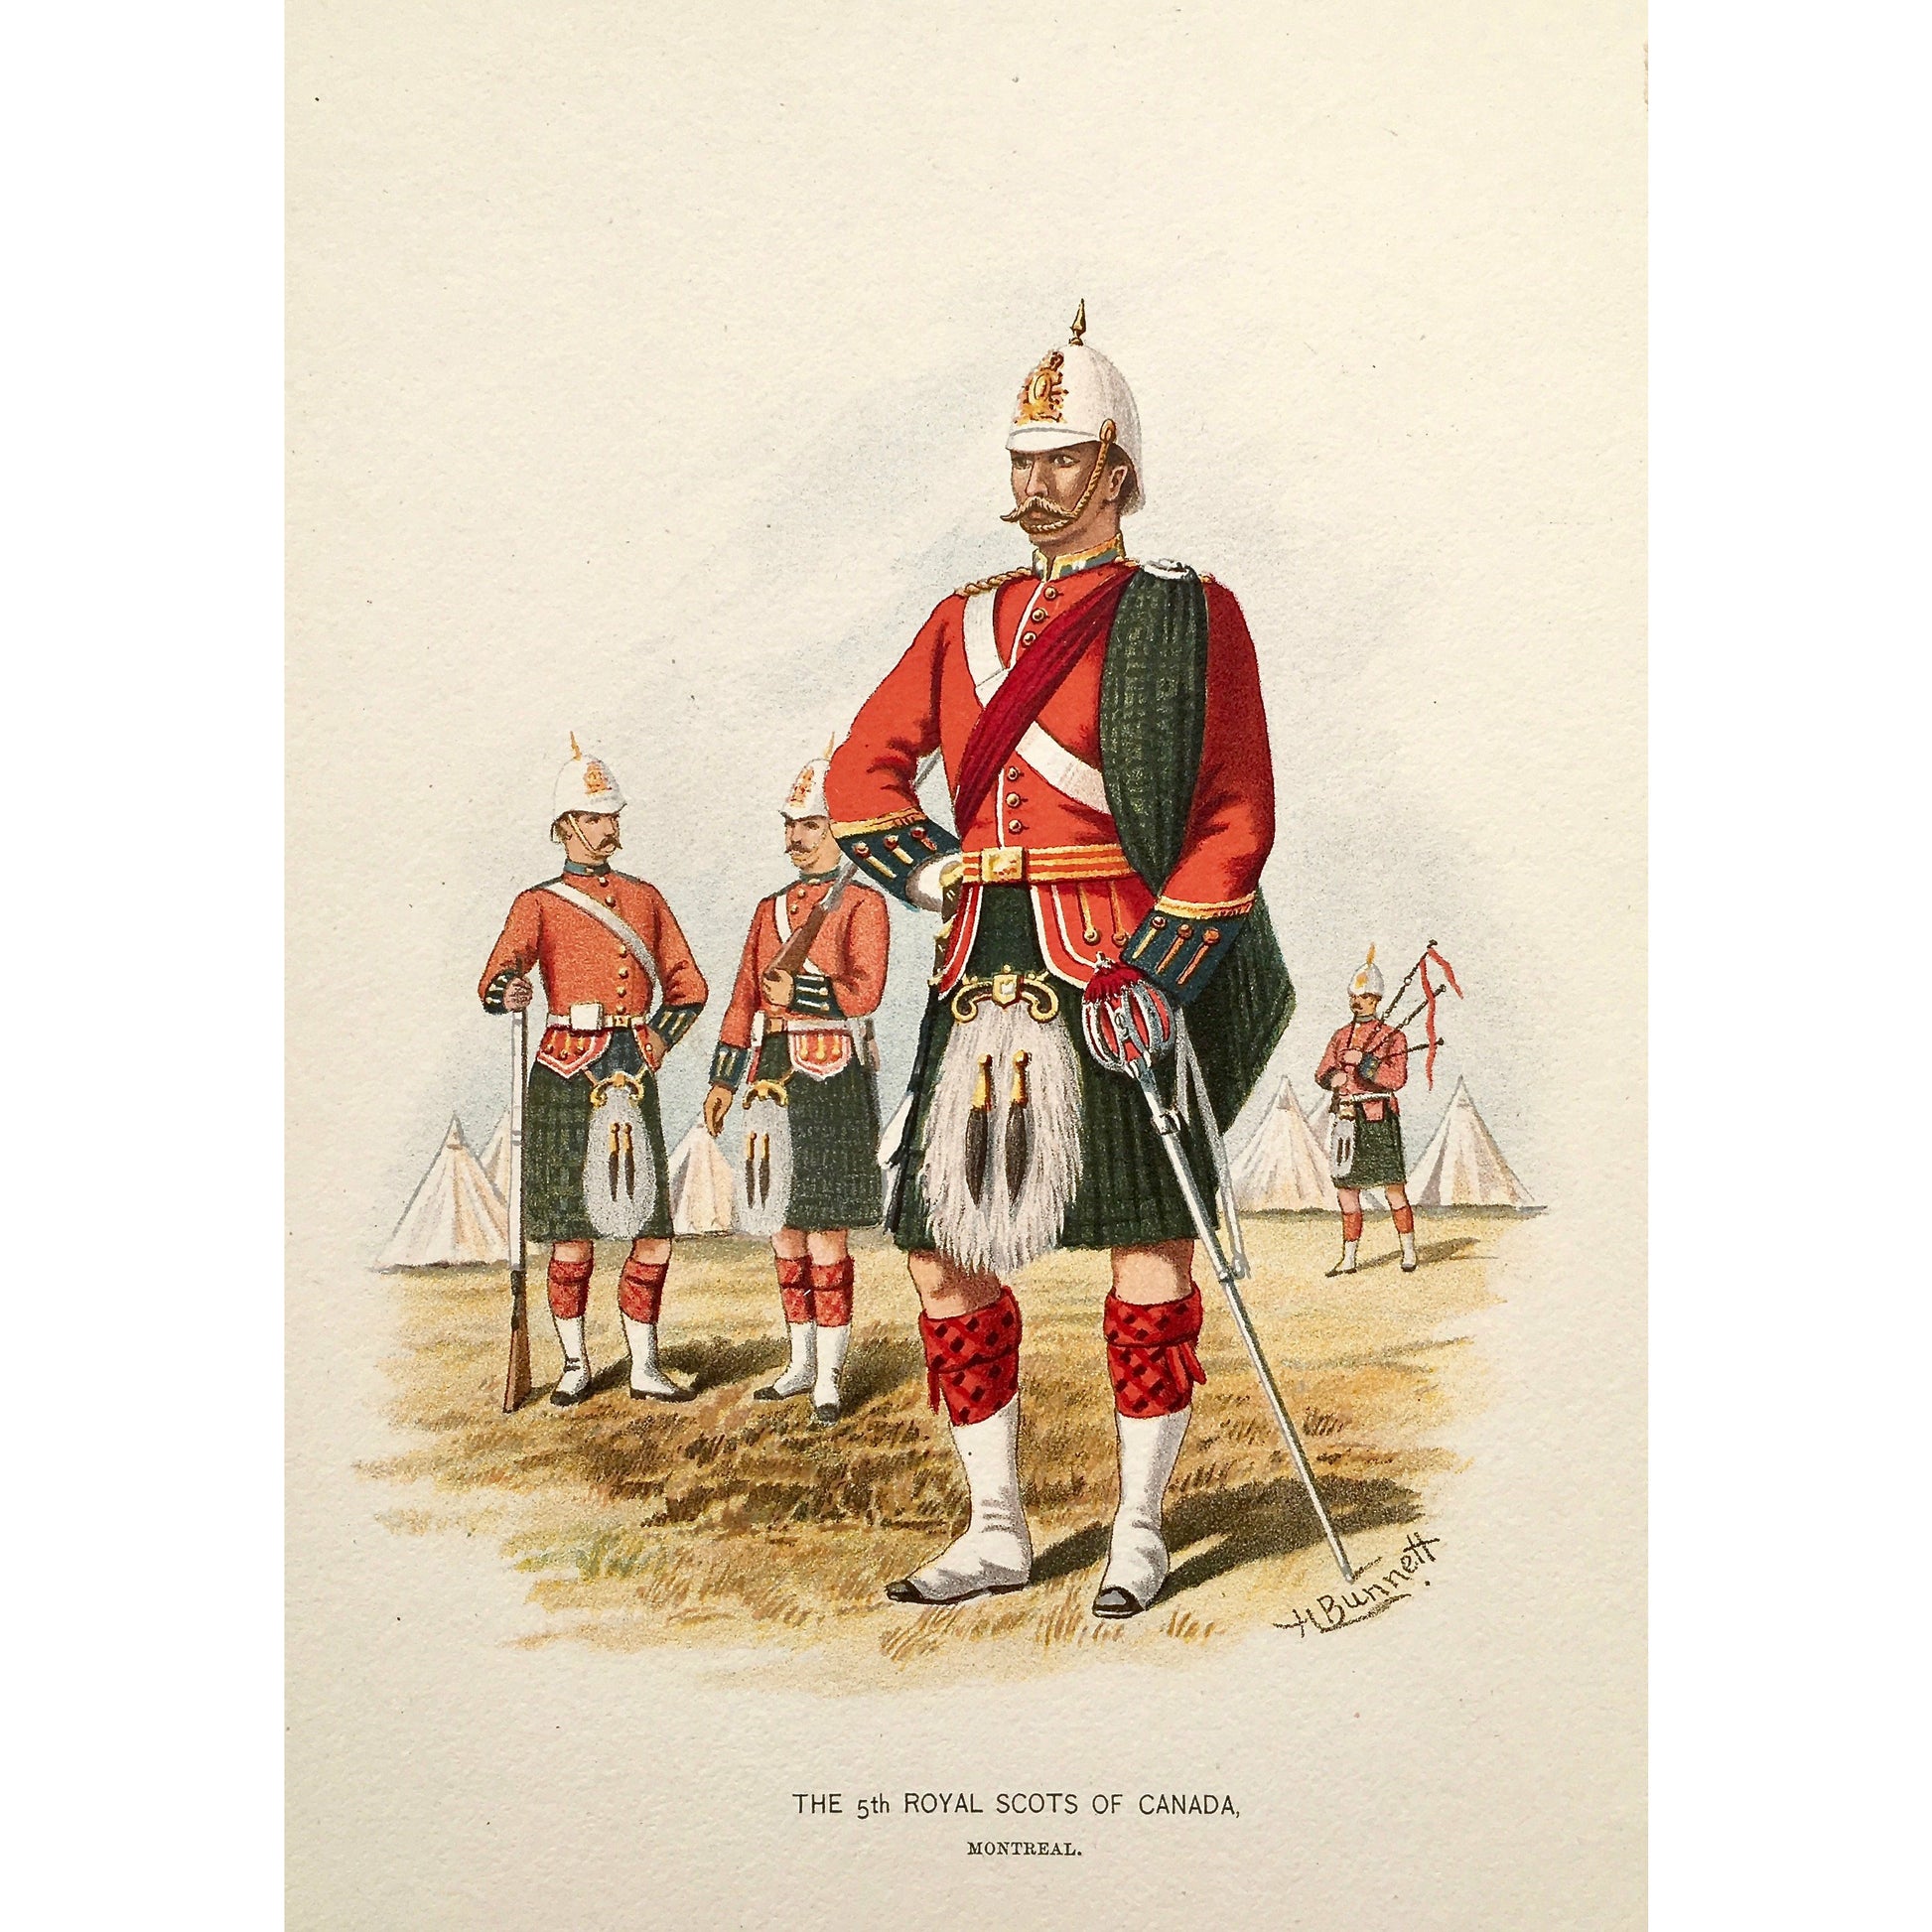 The 5th Royal Scots of Canada, Scots, Royal Scots, Scottish, Scotland, Kilts, bagpipes, Montreal, Canada, Artillery, Military, Military Costume, Horses, Riding, Costume, Uniform, Her Majesty's Army, Regiments, Queen's Forces, H. Bunnett, Bunnett, Sword, Army, London, 1890, Military Prints, Canadian, Canadian Military, Canadian Army, Armed Forces, Military Uniform, Chromolithograph, J. S. Virtue & Co., Antique Prints, Antique, Prints, Militia, Original, Interior decor, office art, army art, queen's army, art